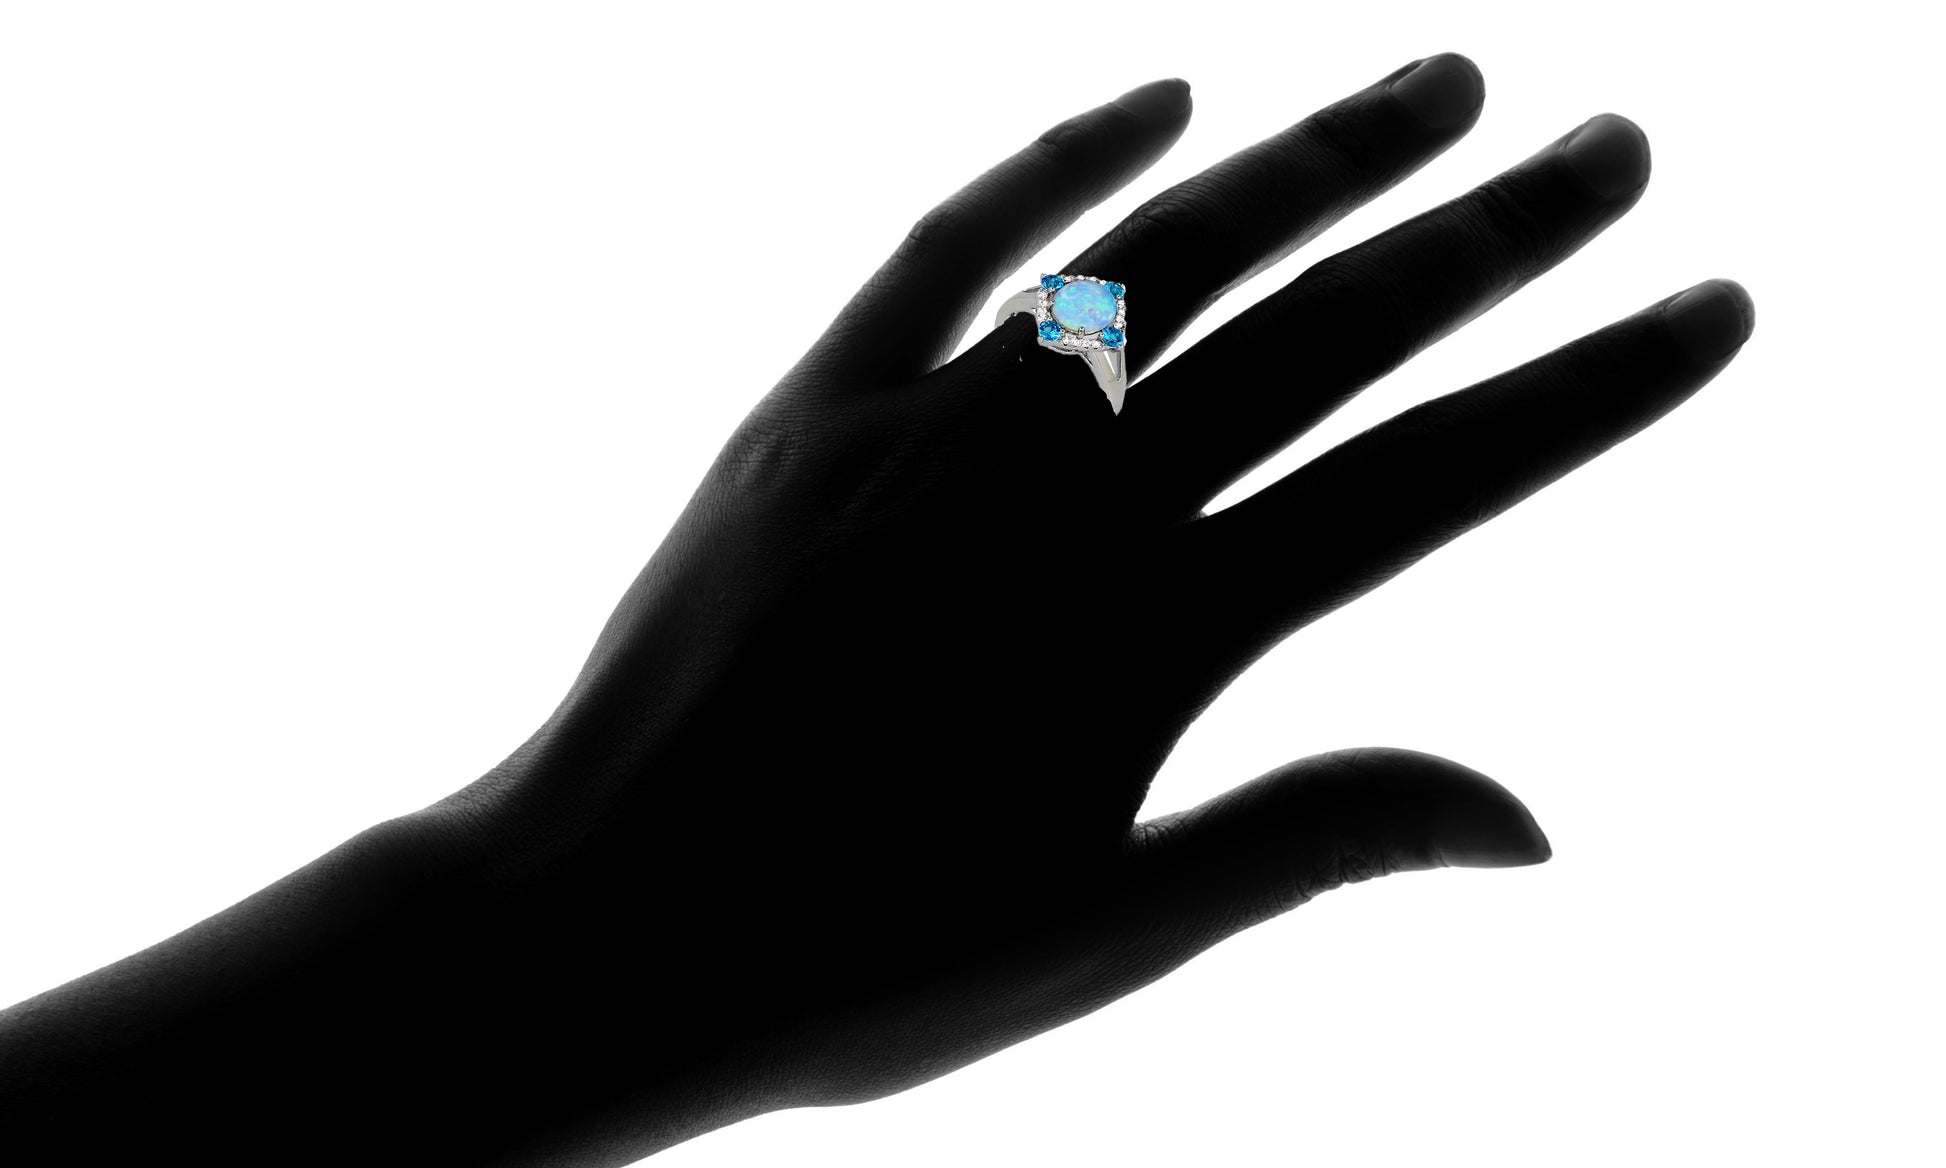 White Fire Opal And Aquamarine Ring On Finger Silhouette